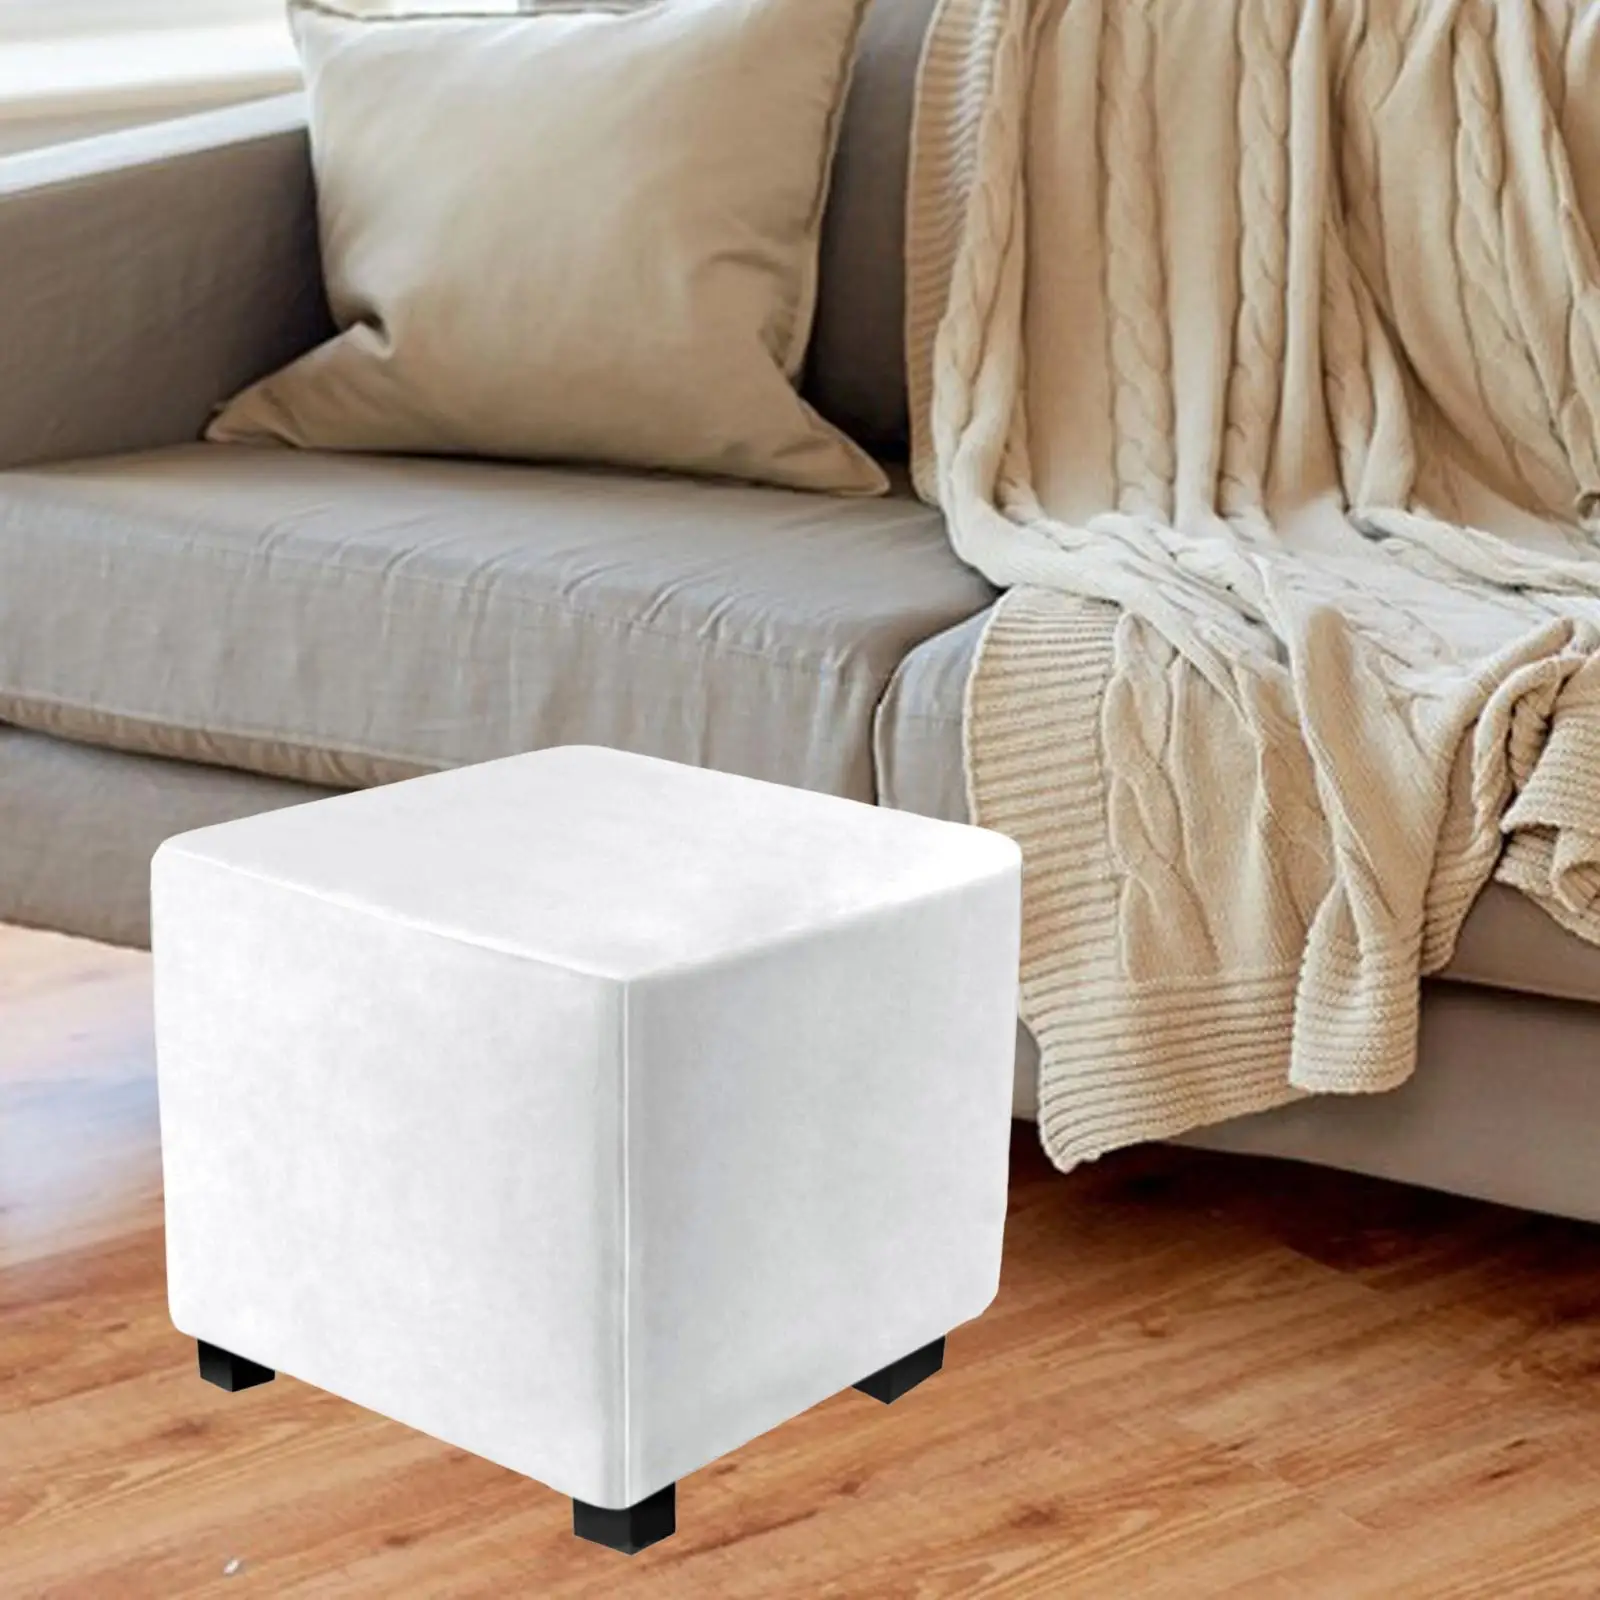 Dustproof Footrest Foot Stool Slipcover with Elastic Bottom Ottoman Cover